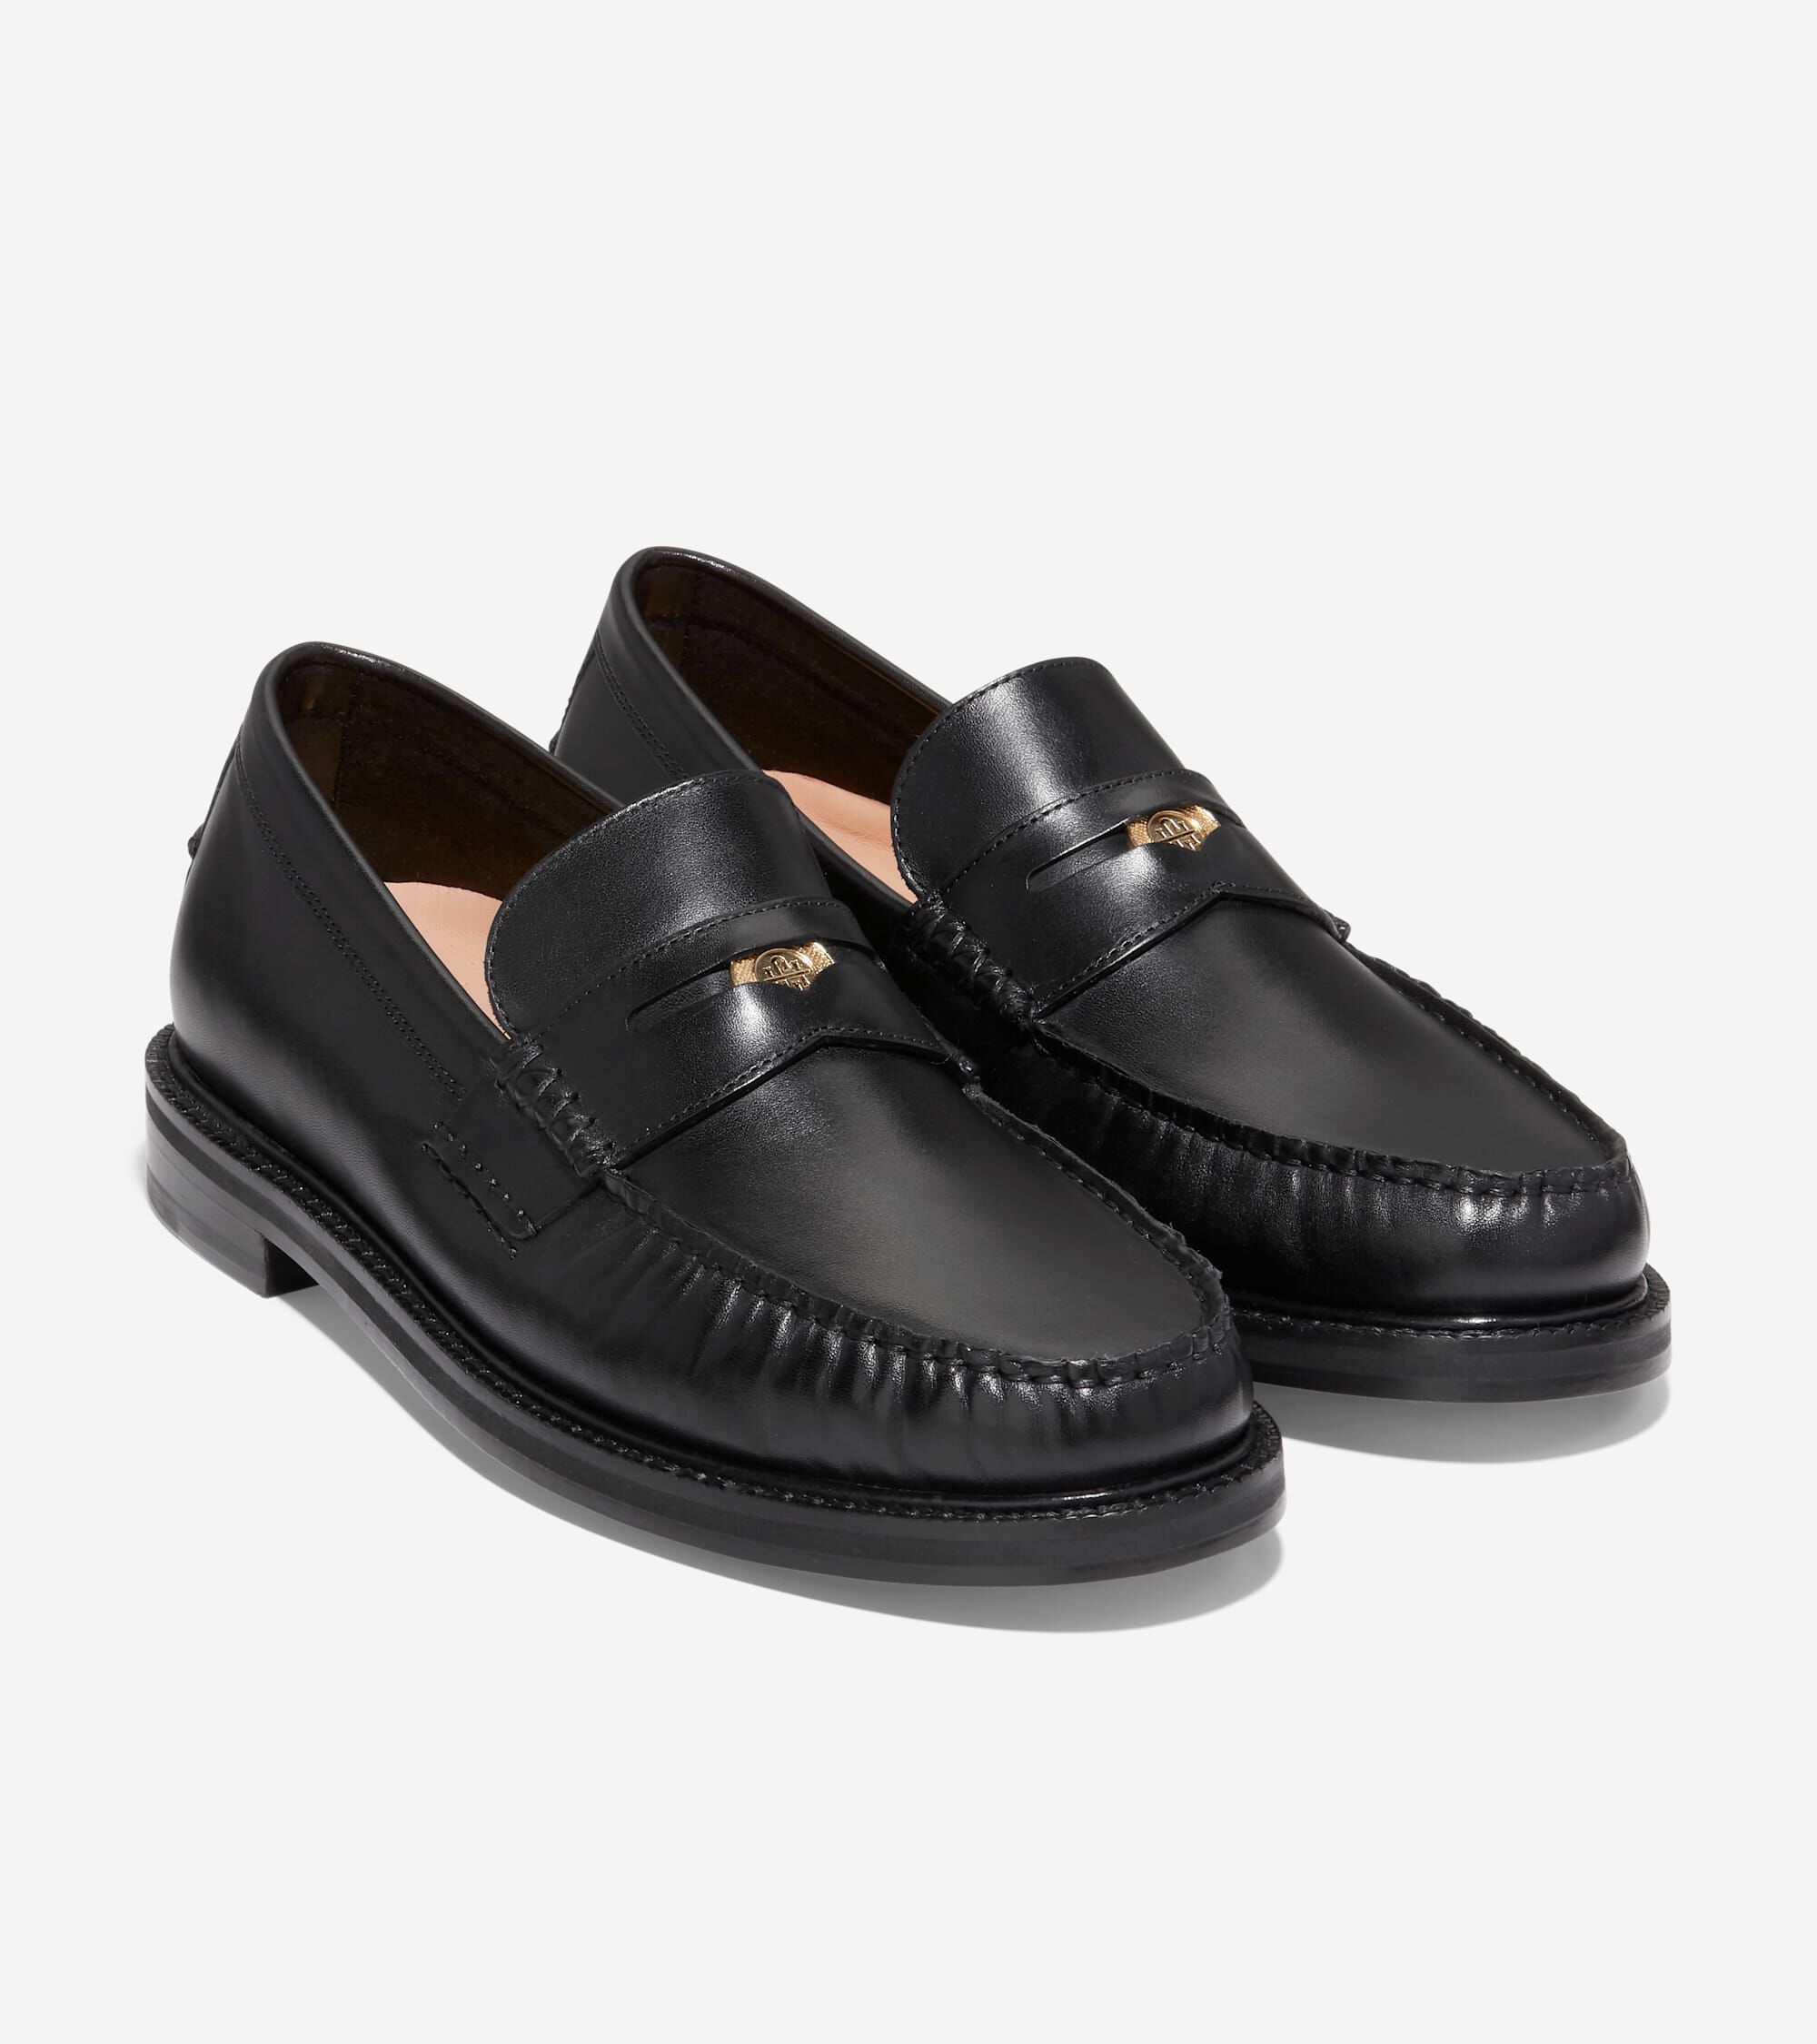 Men's American Classics Pinch Penny Loafer in Black | Cole Haan